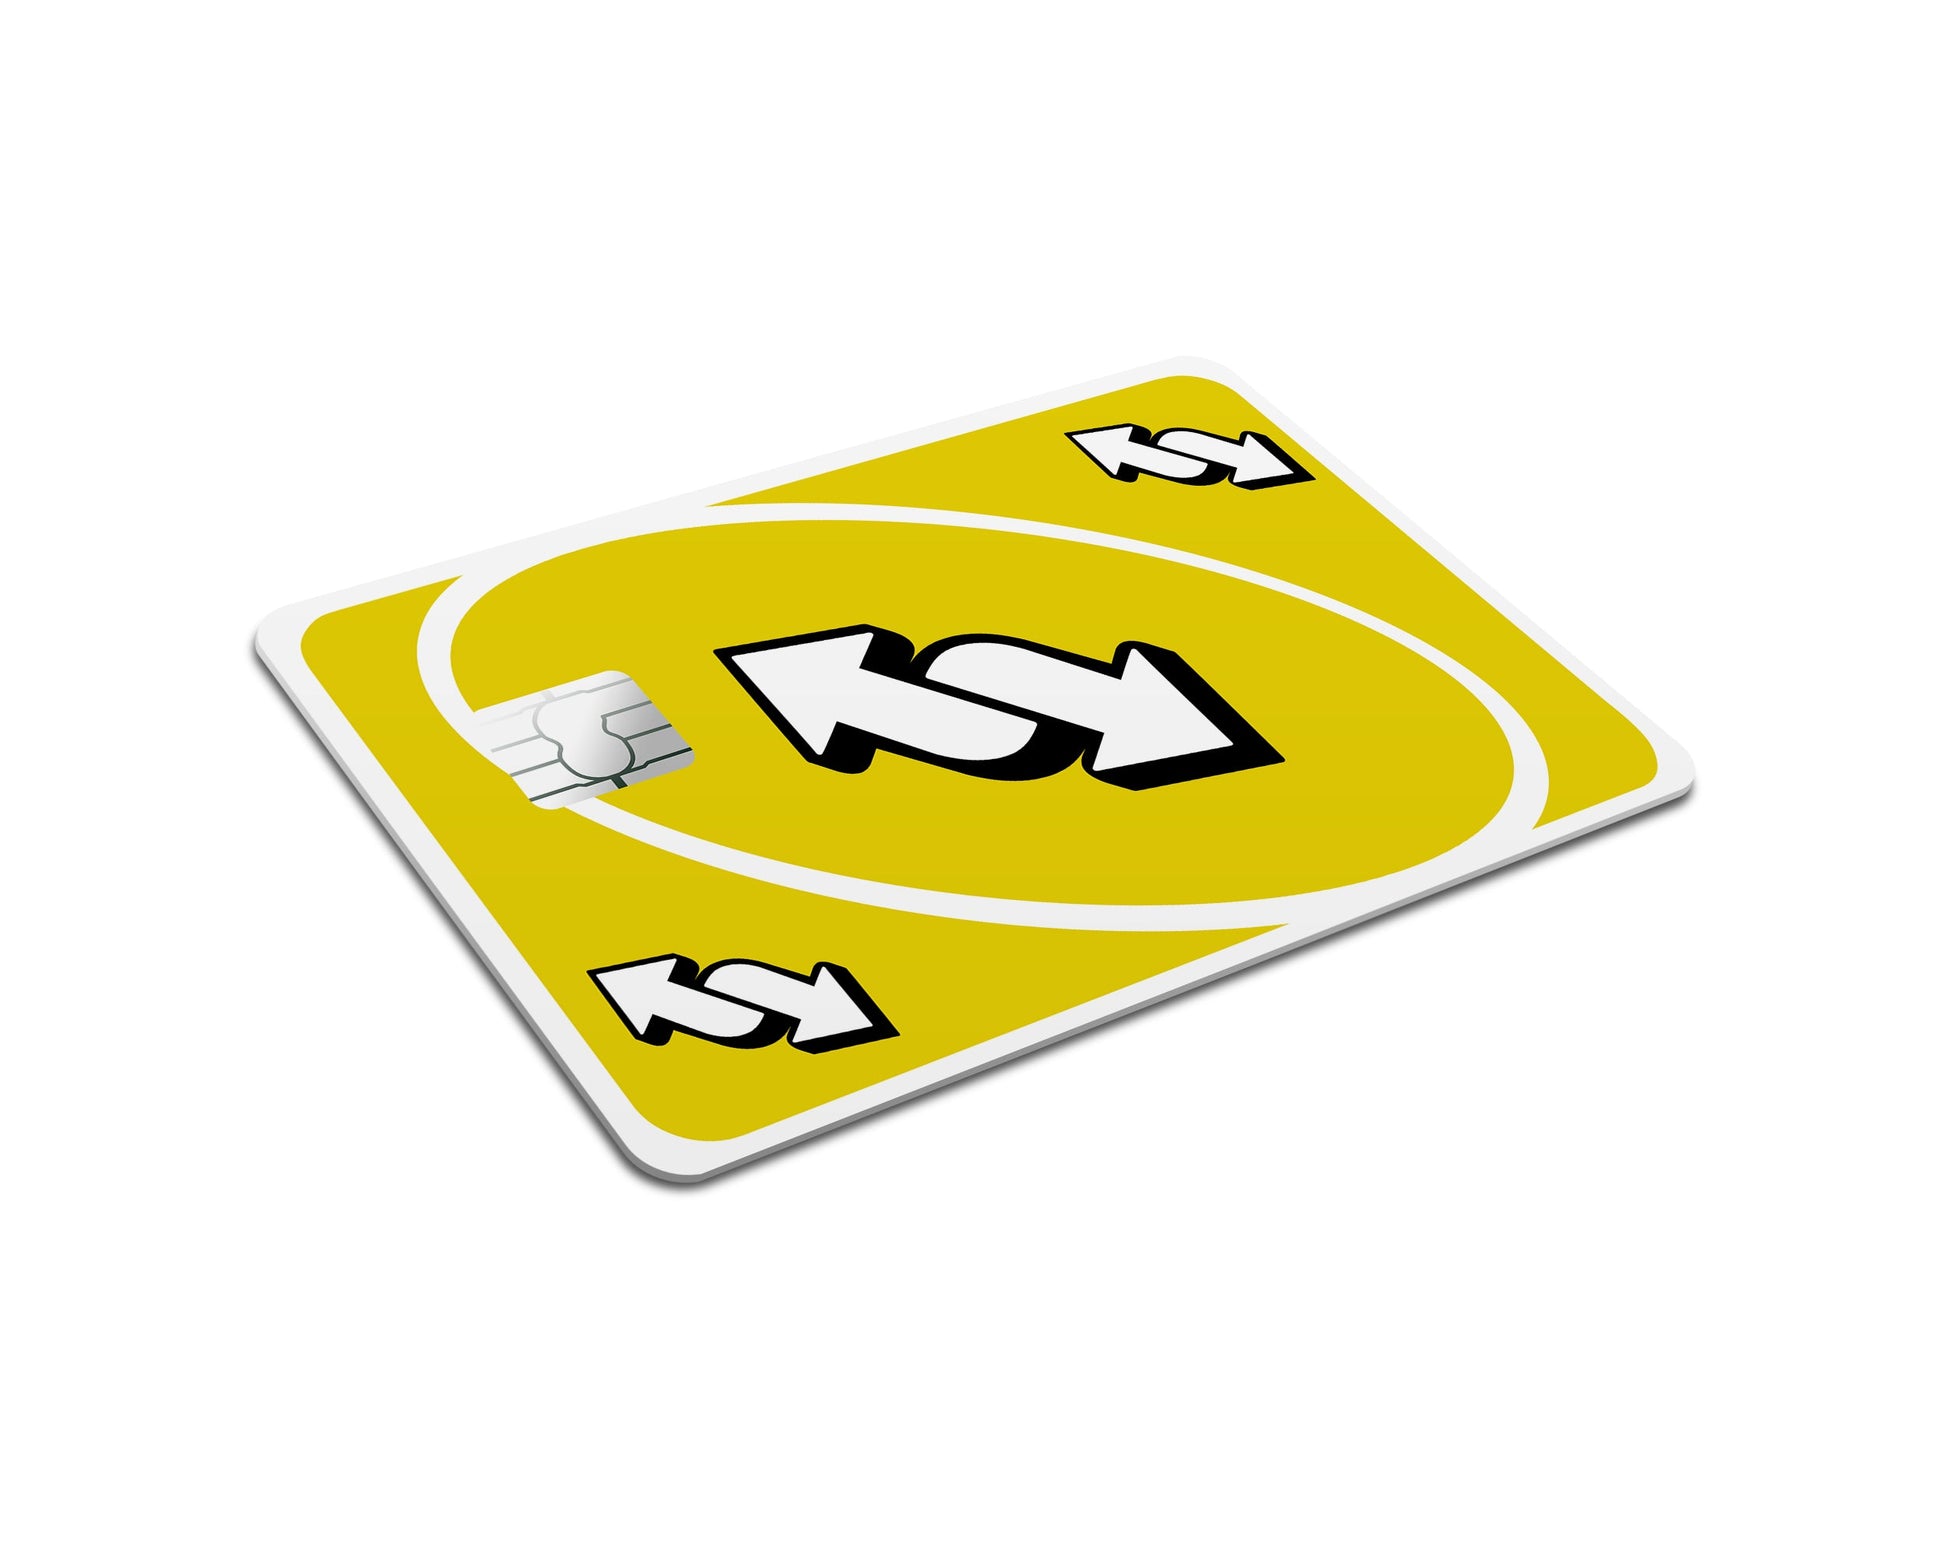 UNO Reverse card (classic) by Ornotermes